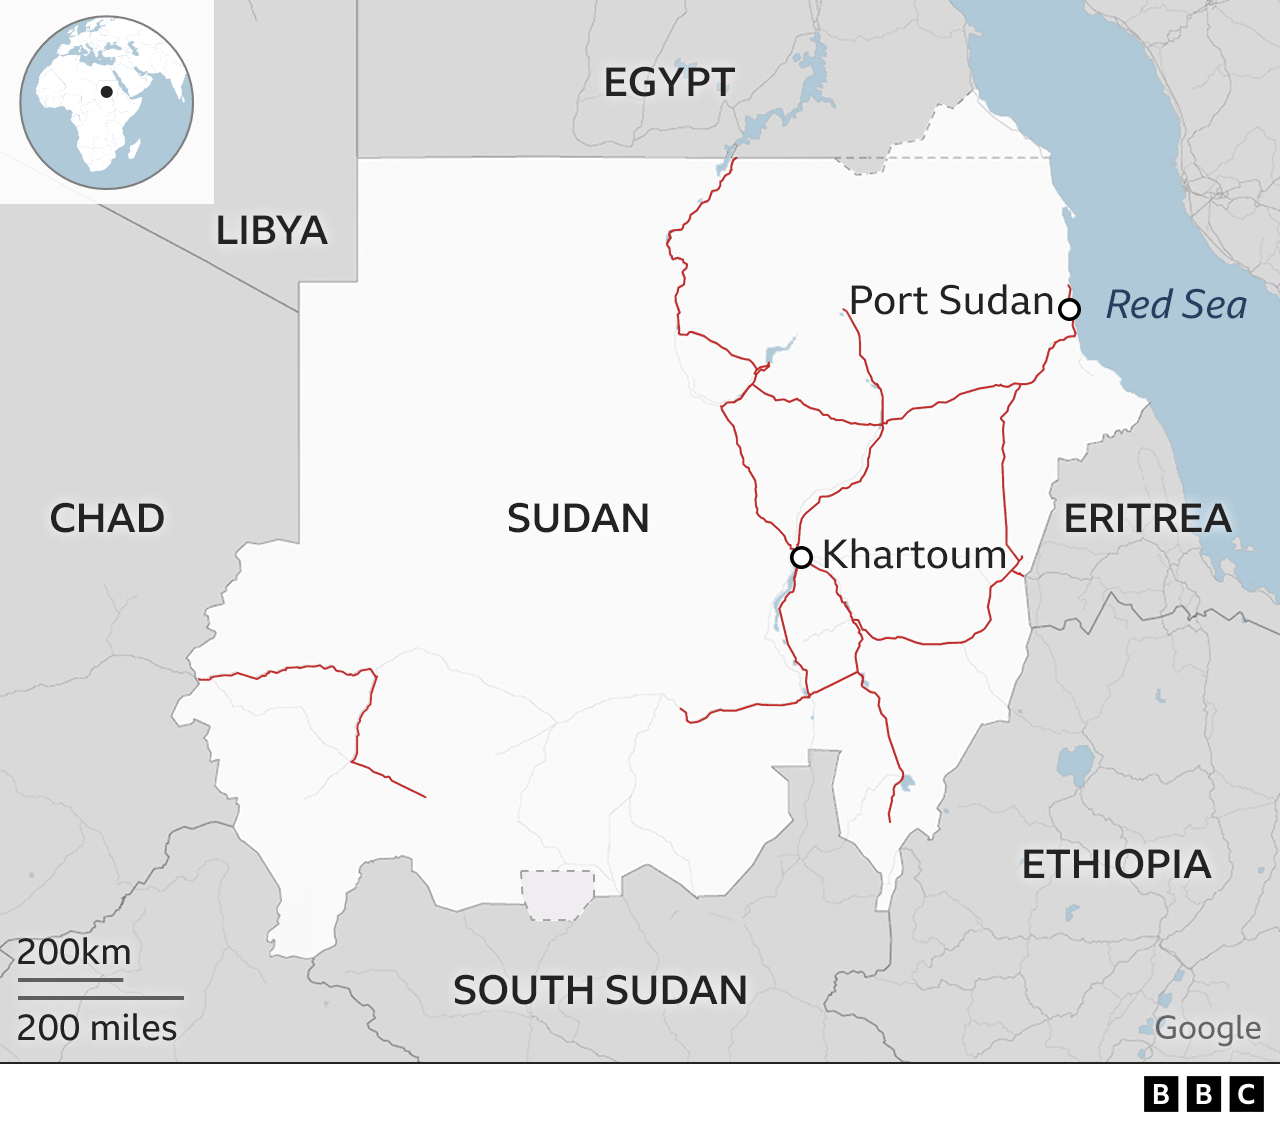 Sudan: Why has fighting broken out there? - BBC News